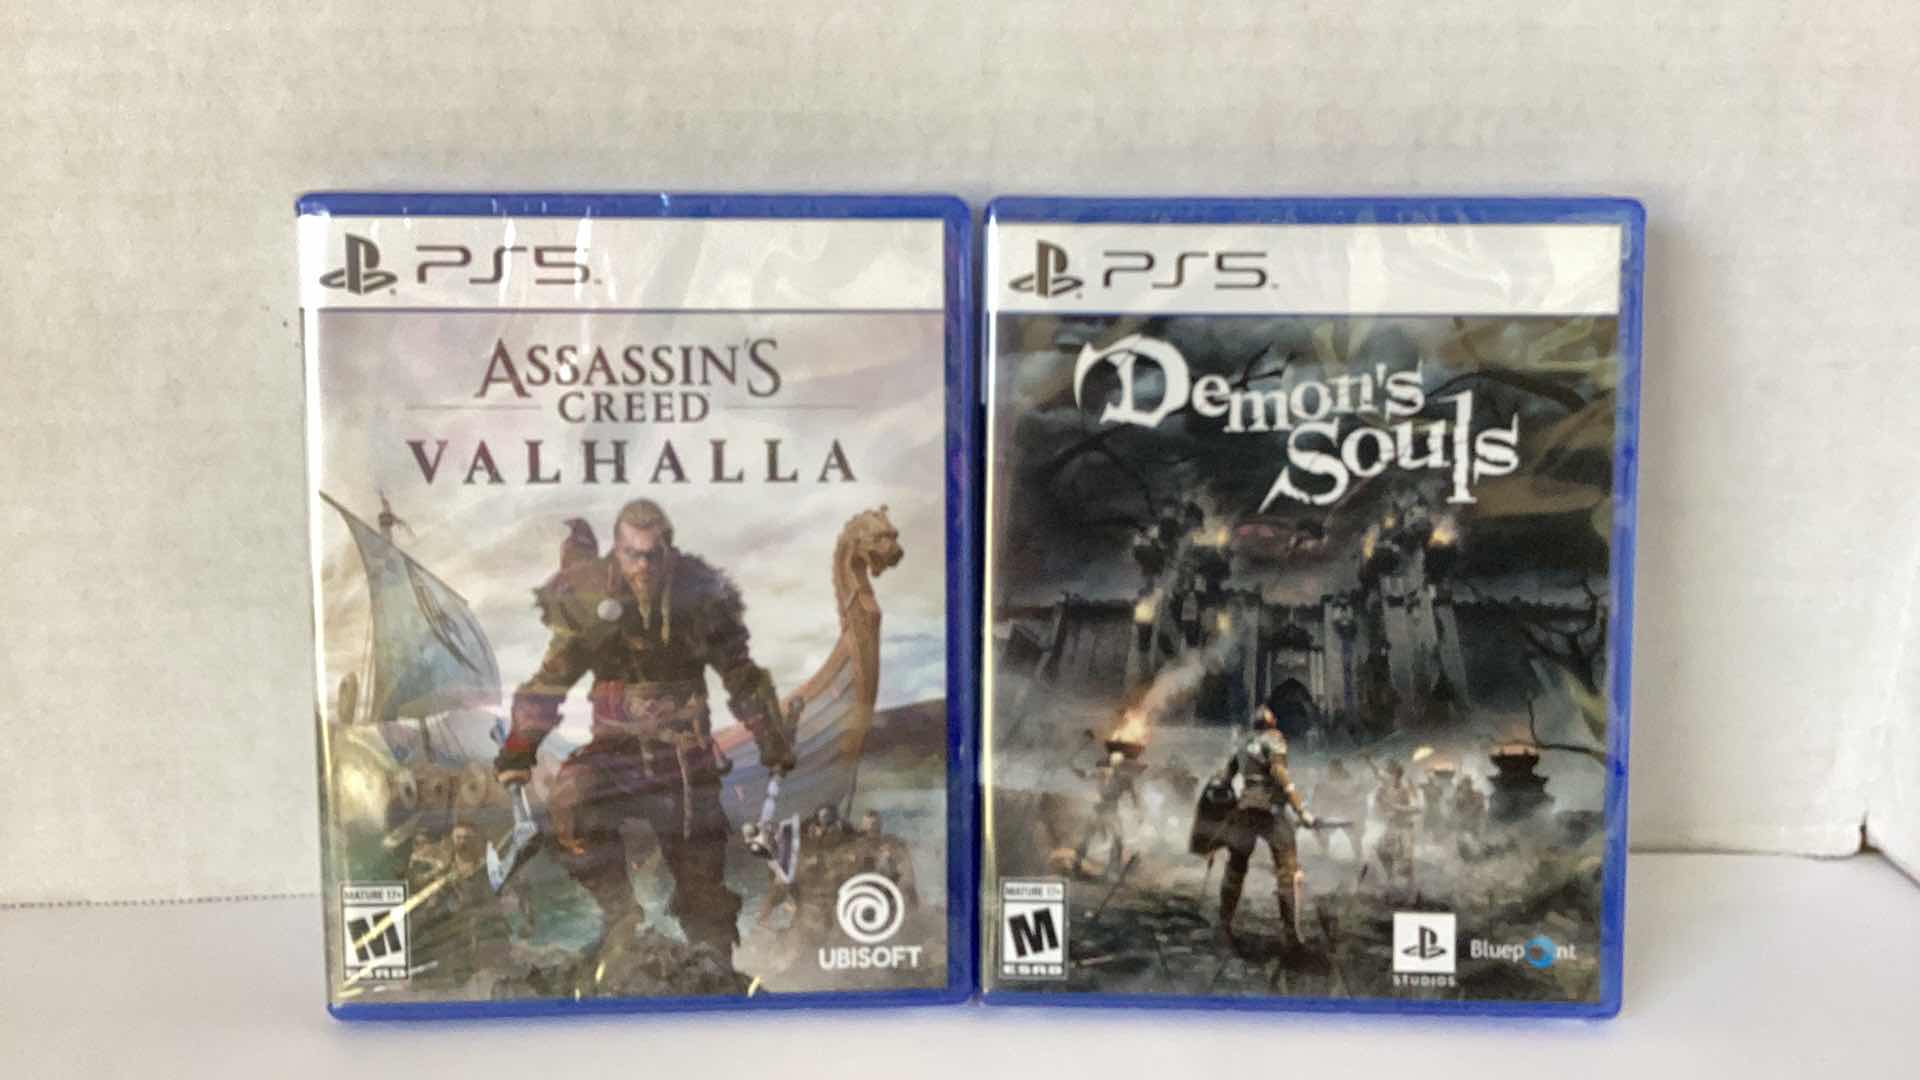 Photo 1 of 2 NEW PS5 GAMES: ASSASSIN'S CREED VALHALLA AND DEMON'S SOULS